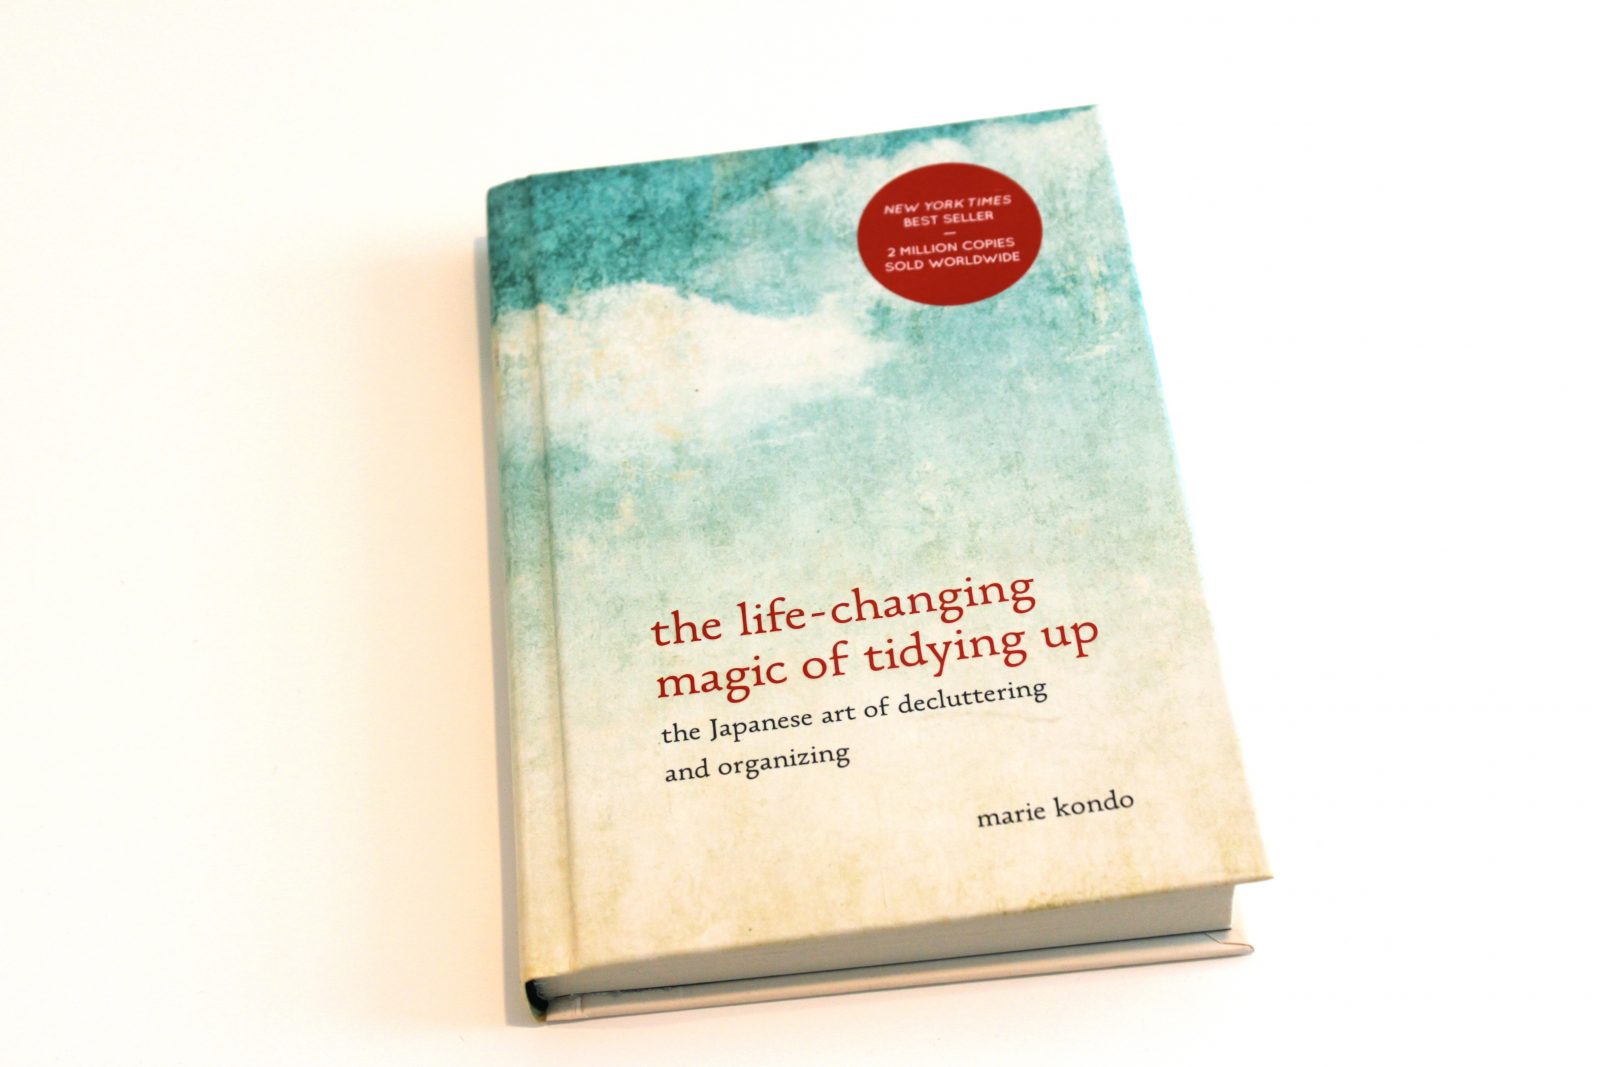 When the life is changing. The Life changing Magic of Tidying up by Marie Kondo. Marie Kondō – the Life-changing Magic of Tidying up. Tidying up. The Day that changing Magic back Cover.